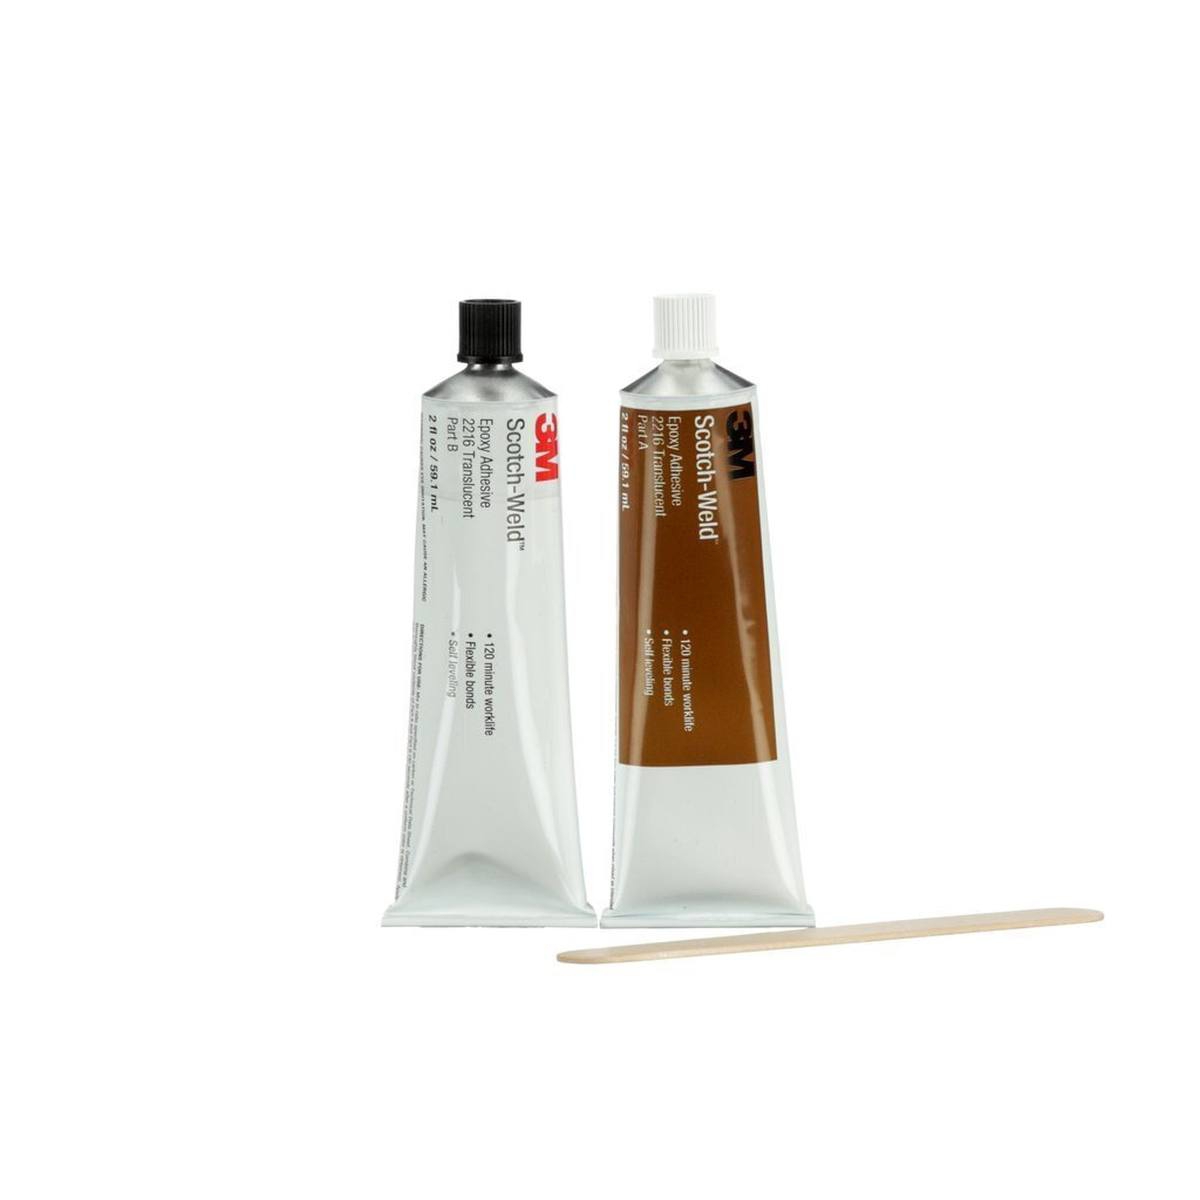 3M Scotch-Weld 2-component construction adhesive based on epoxy resin 2216 B/A, gray, 59 ml